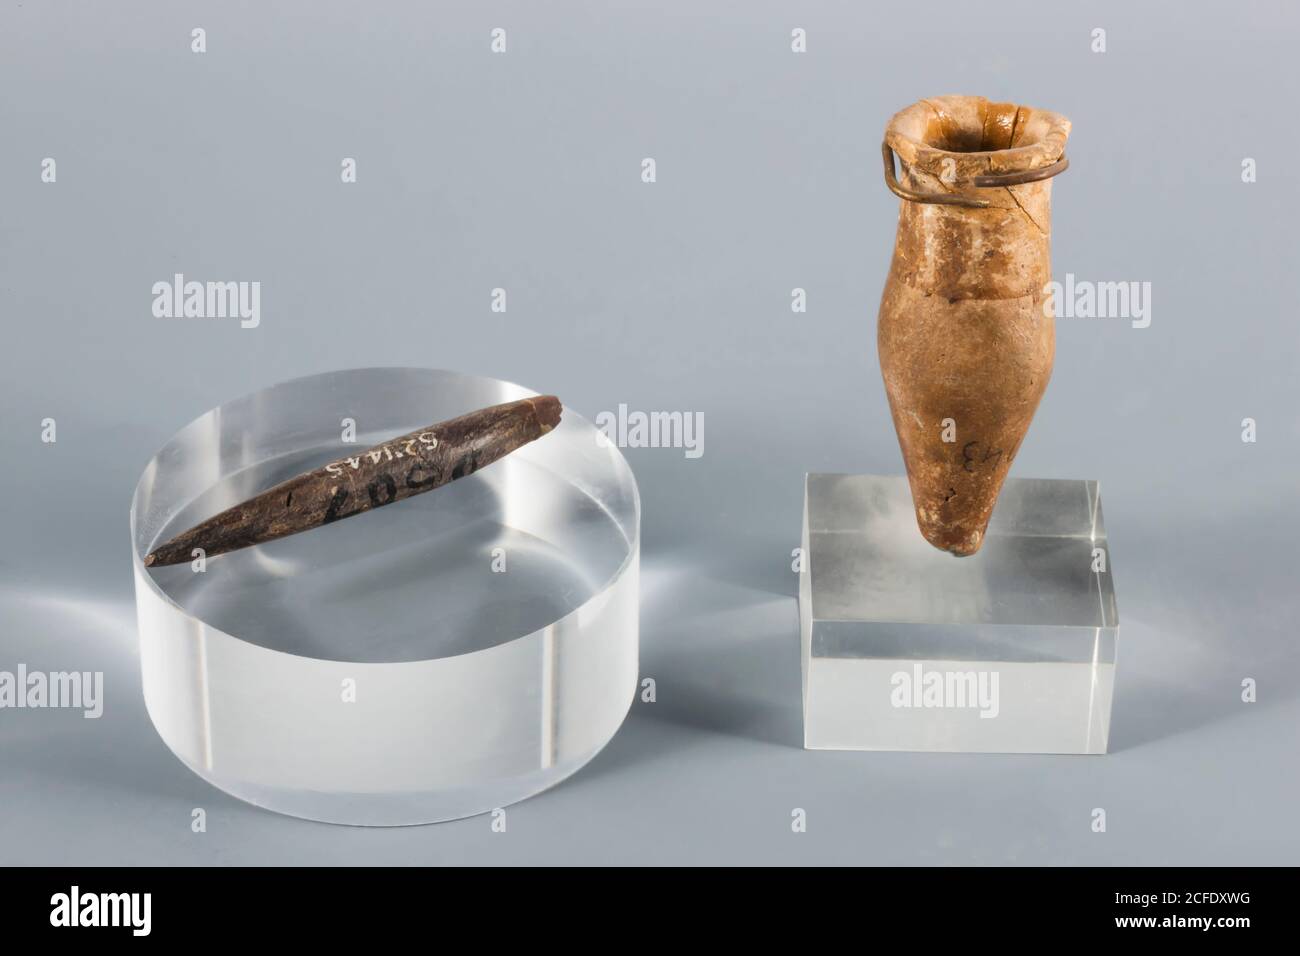 Cosmetic rod and bottle, Mohenjo daro, Indus valley civilization Gallery, National Museum of Pakistan, Karachi, Sindh, Pakistan, South Asia, Asia Stock Photo